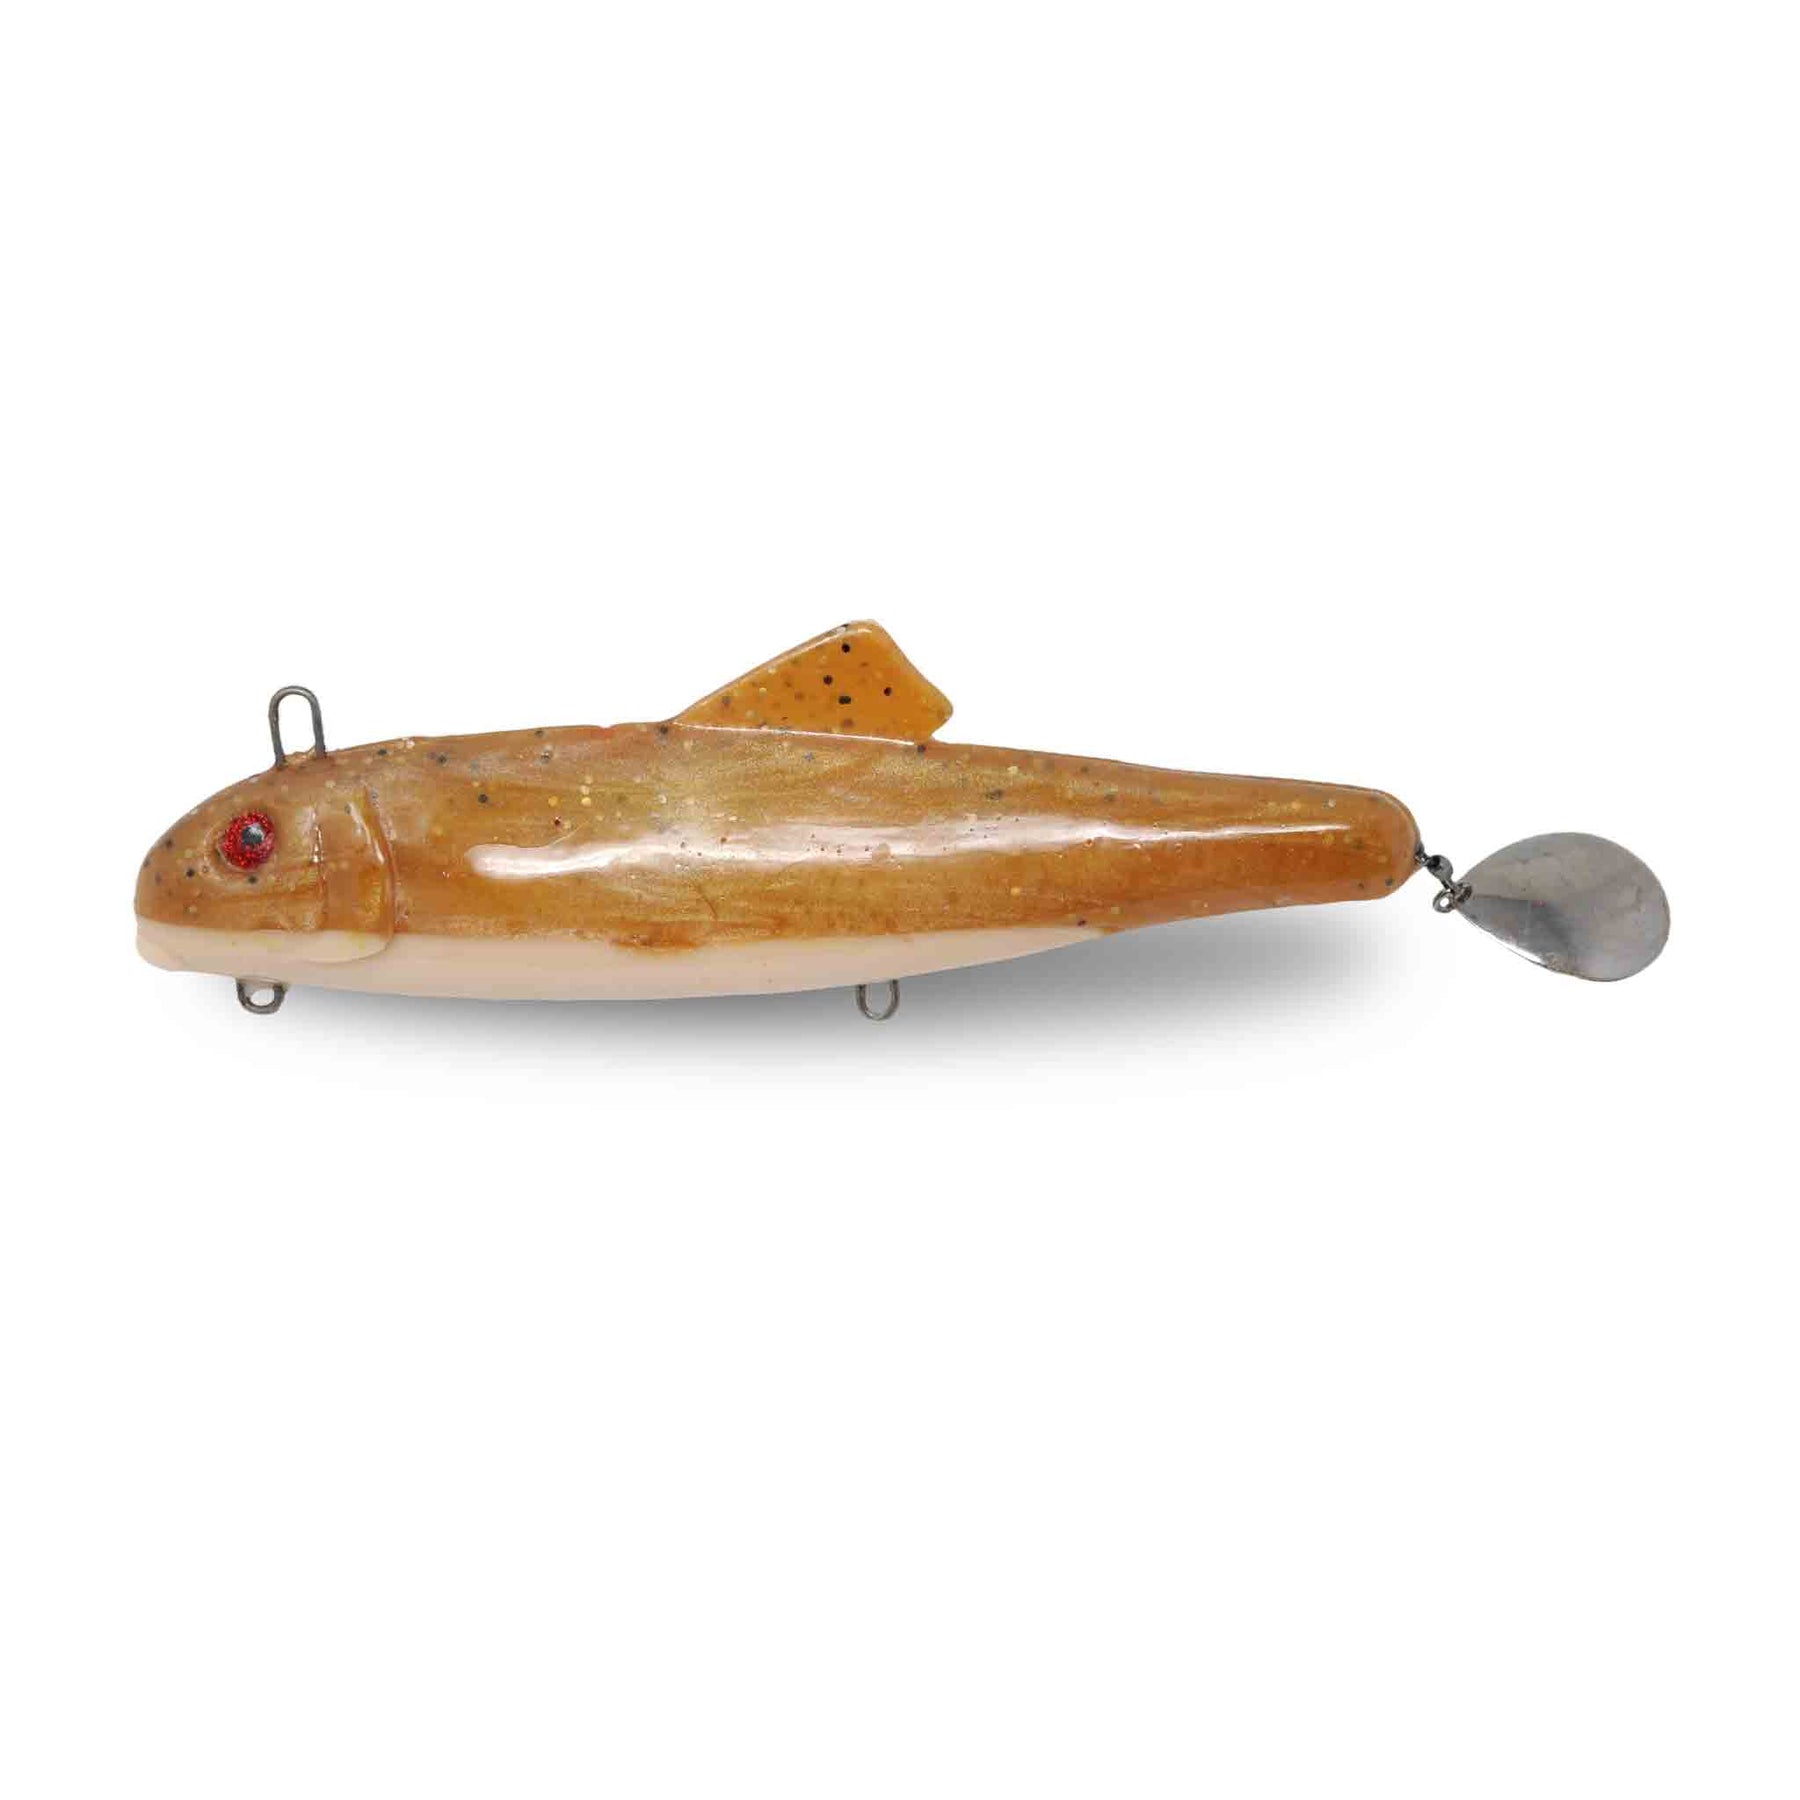 View of Jigs-Spoons SJR Spintail Sucker Jig Sucker / White Belly available at EZOKO Pike and Musky Shop